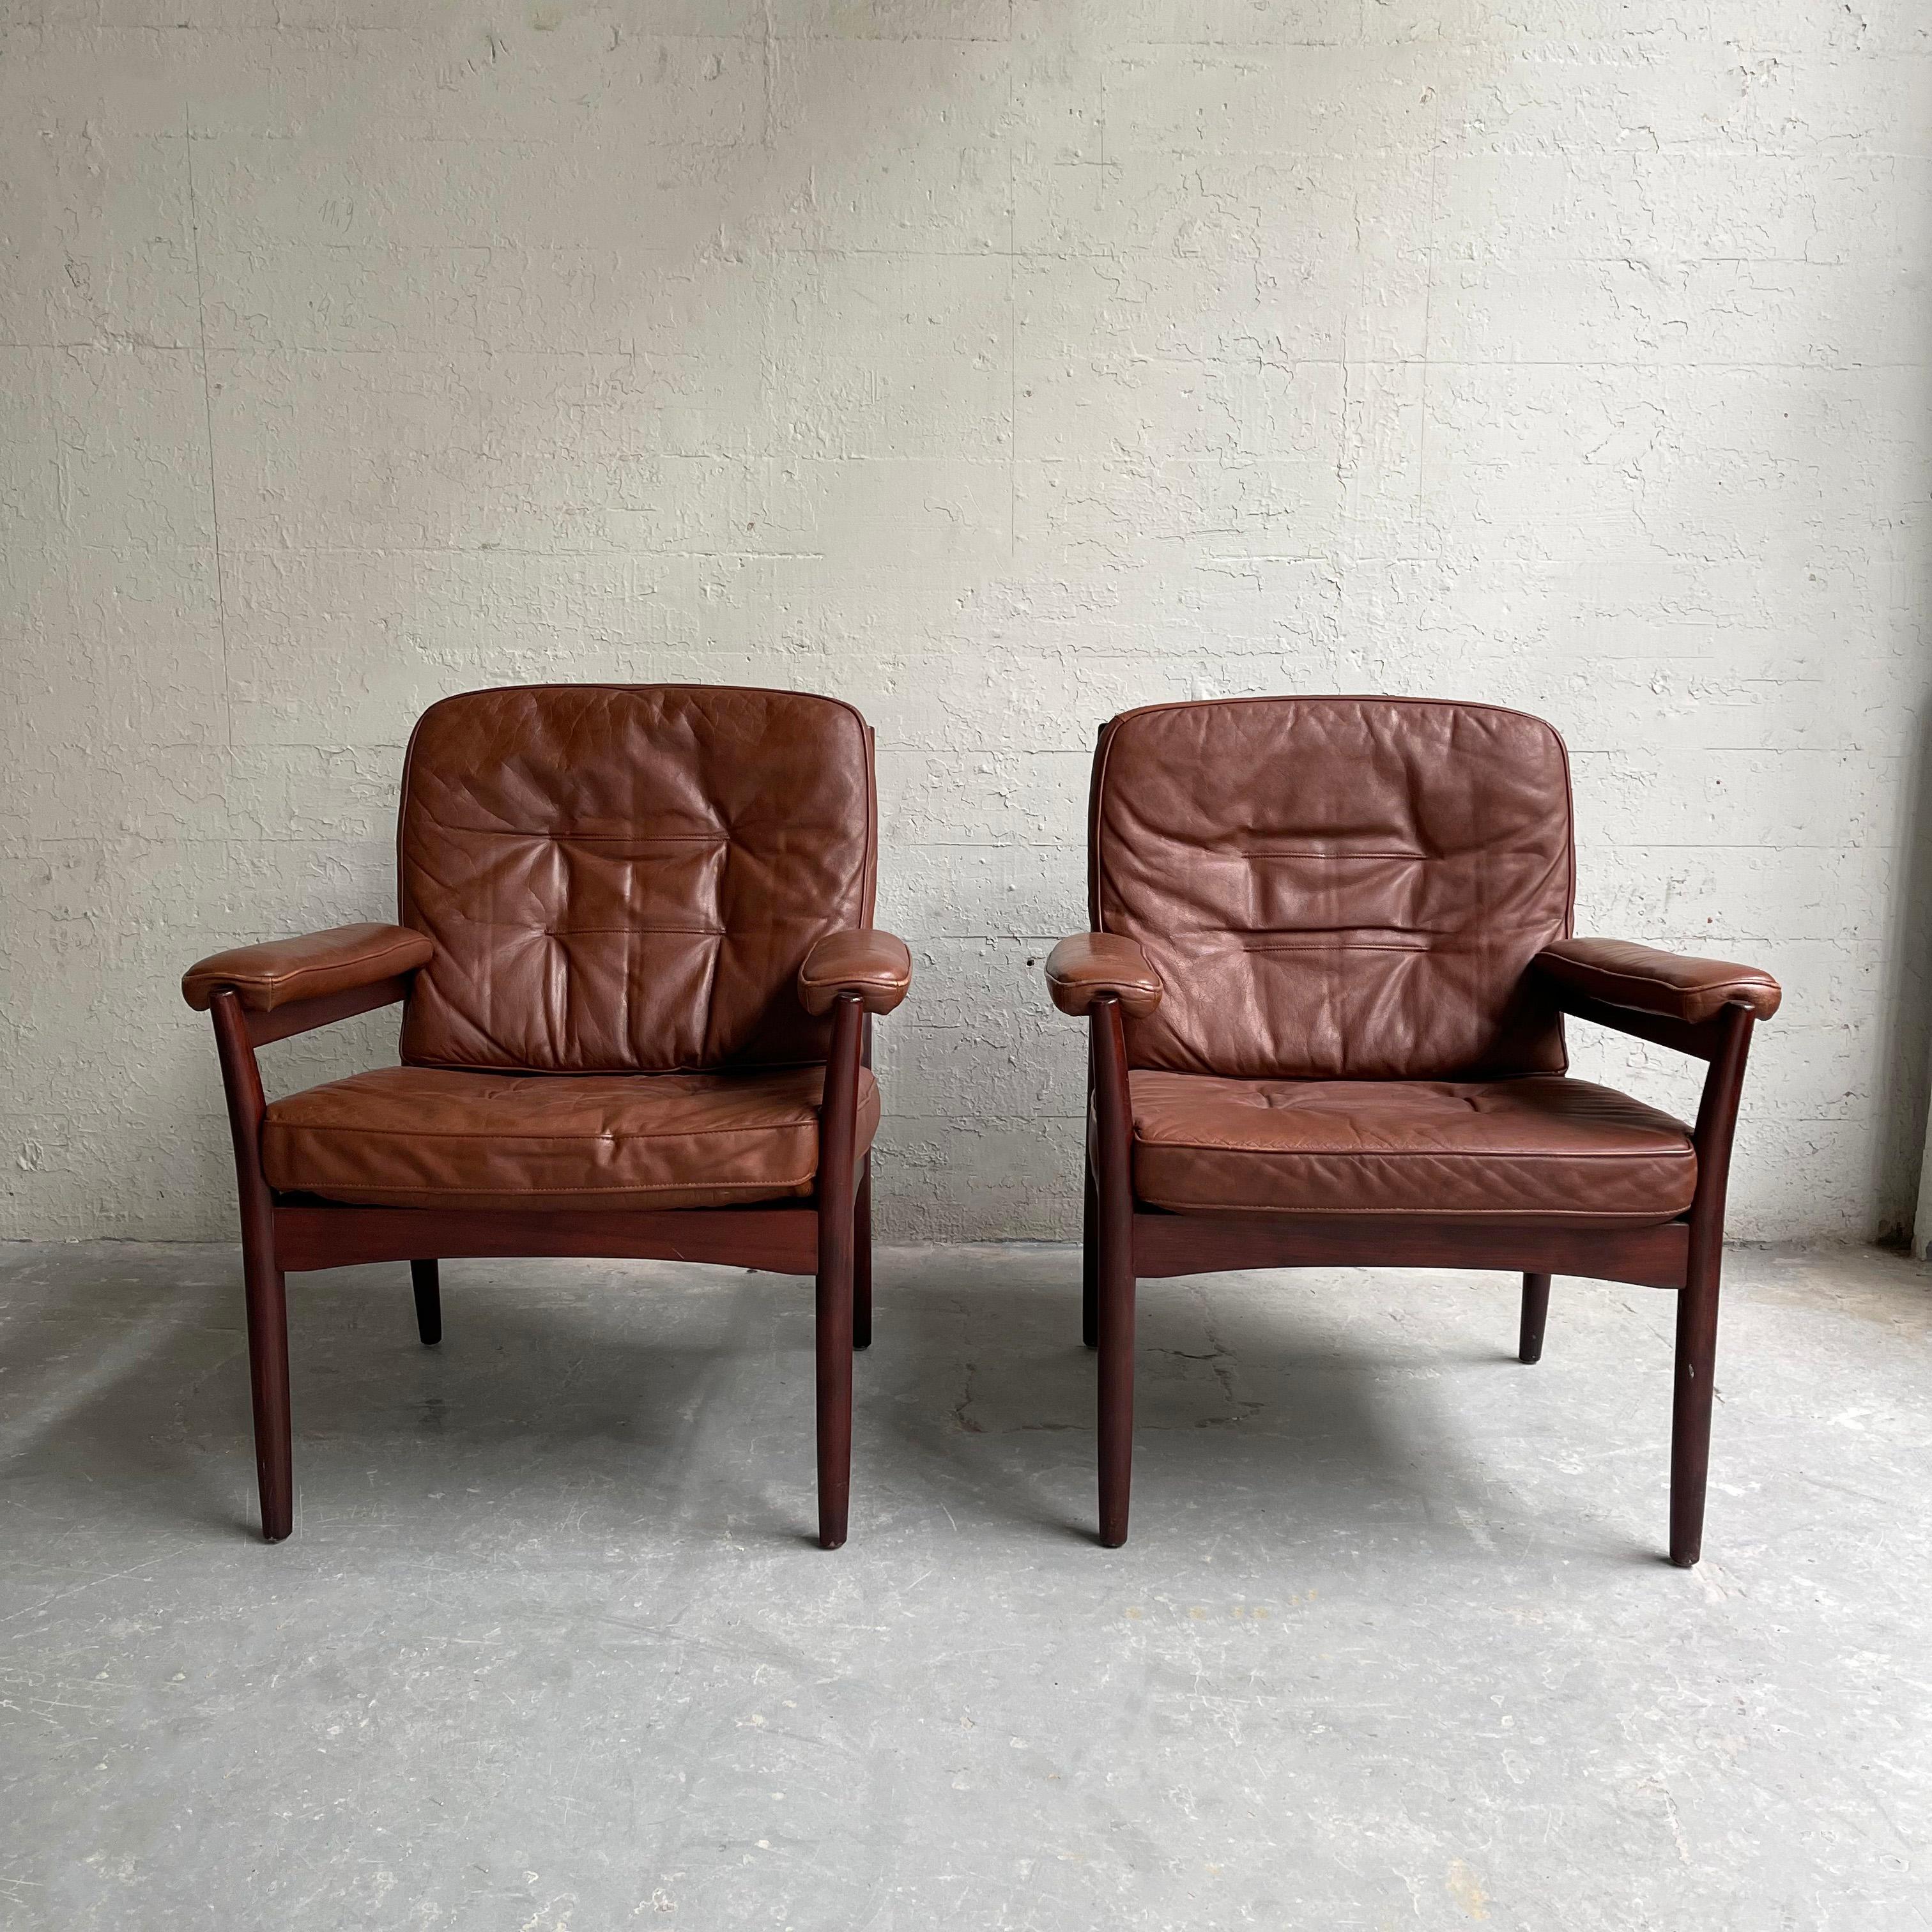 20th Century Pair of Leather and Rosewood Armchairs by Göte Möbel Sweden